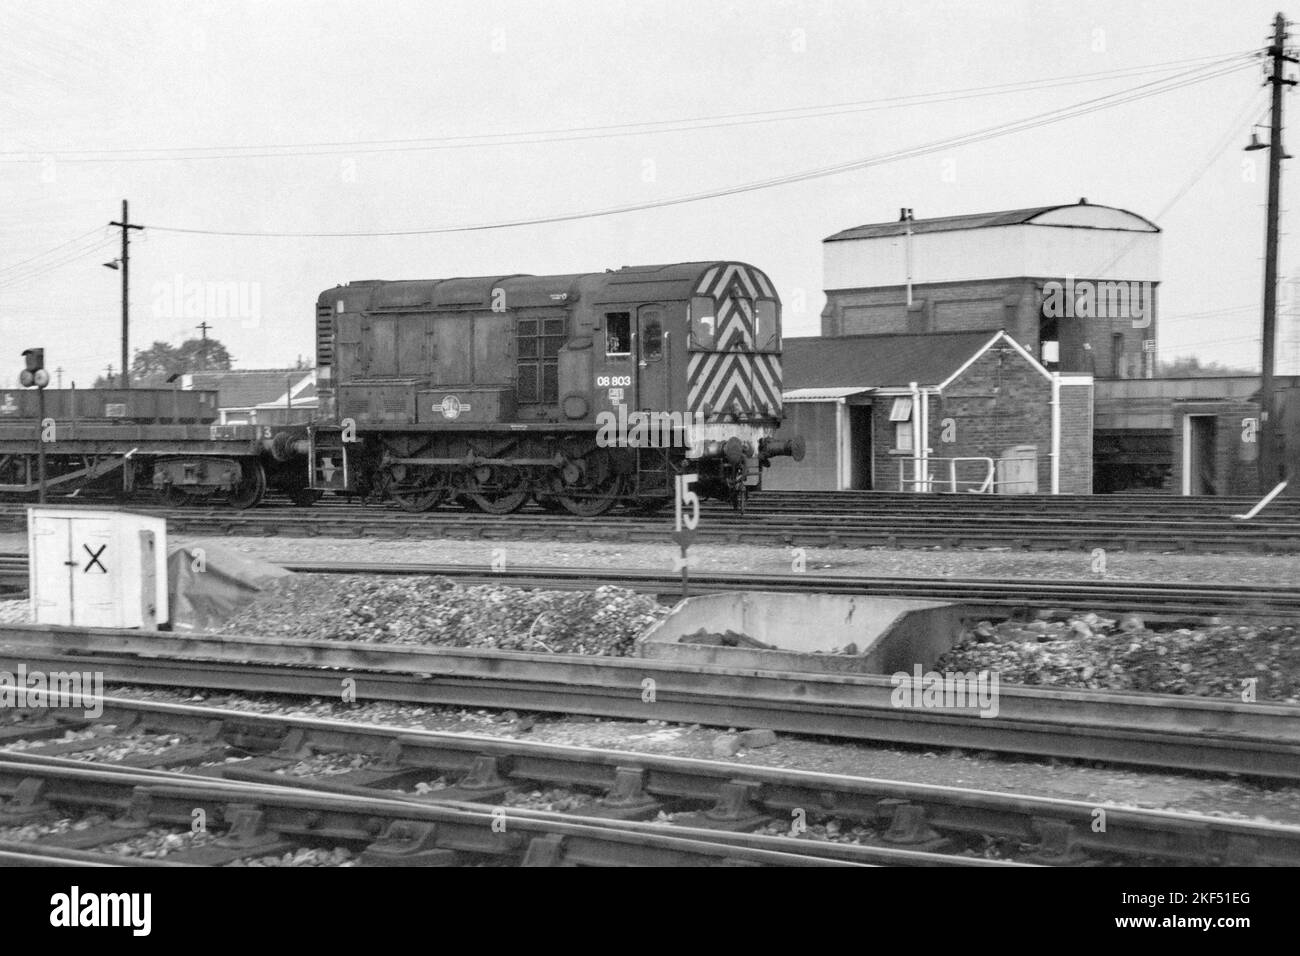 original british rail diesel locomotive class 08 number 08803 shunter on shunting service didcot late 1970s early 1980s Stock Photo